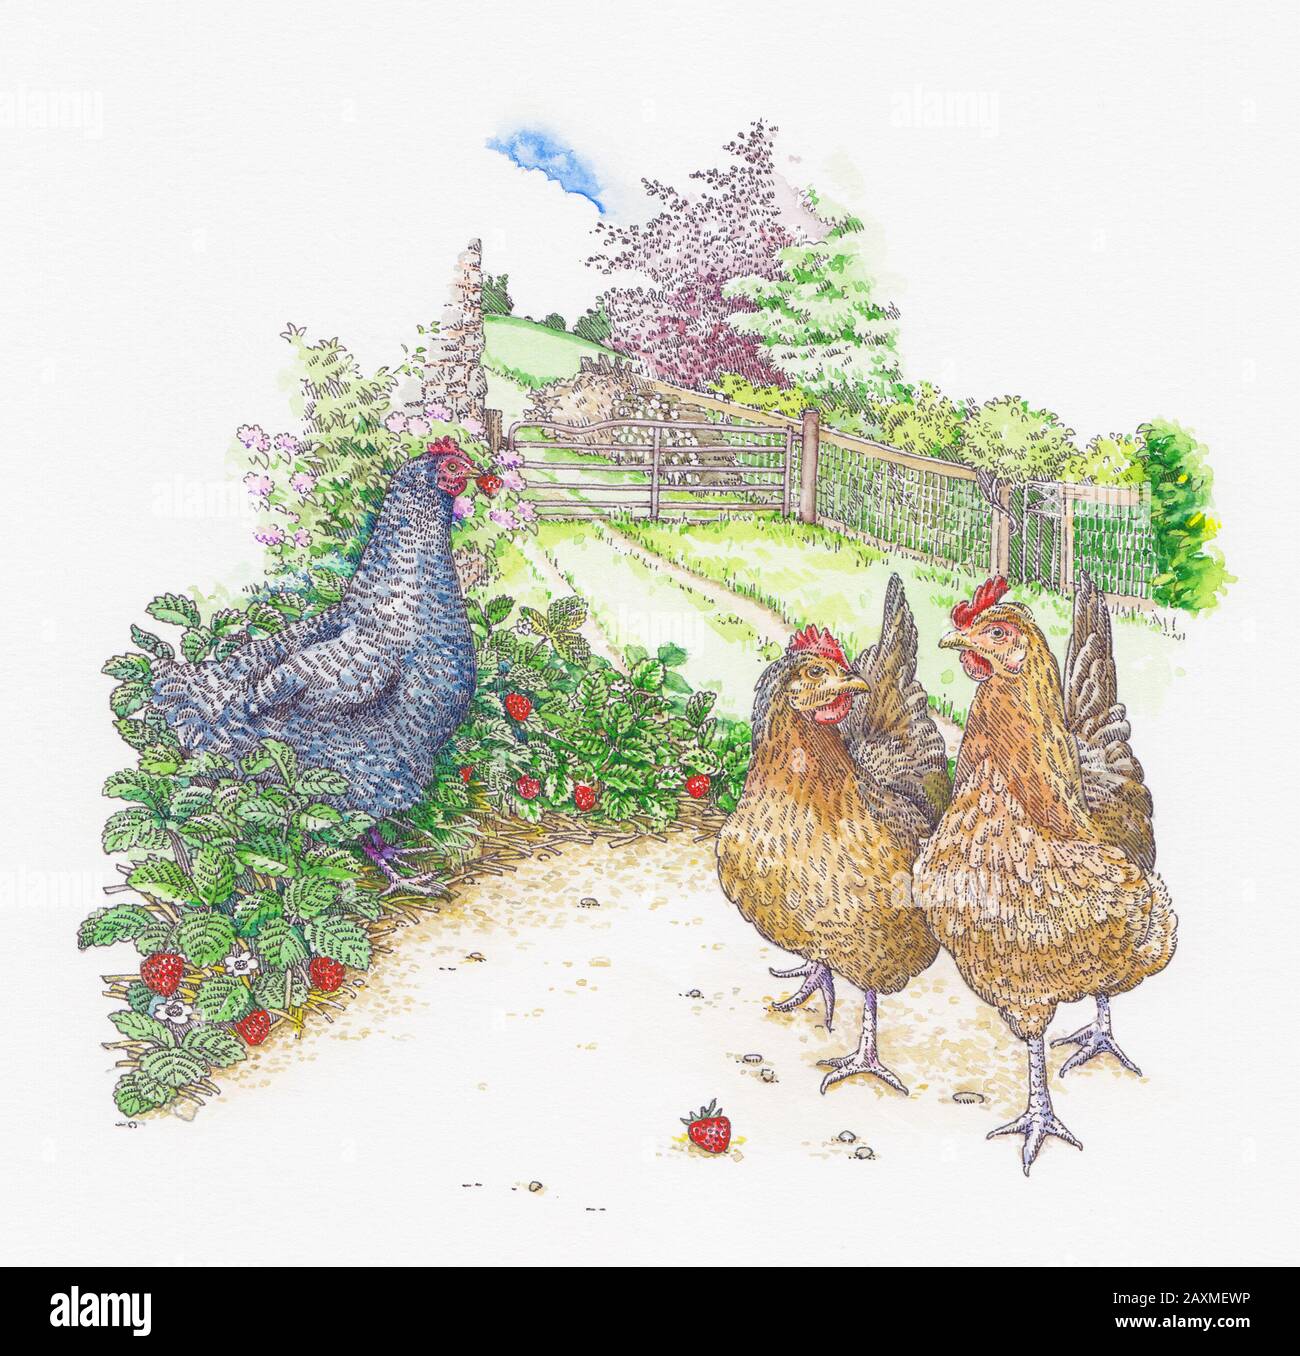 Maran and Welsummer chickens walking and eating strawberries in garden Stock Photo